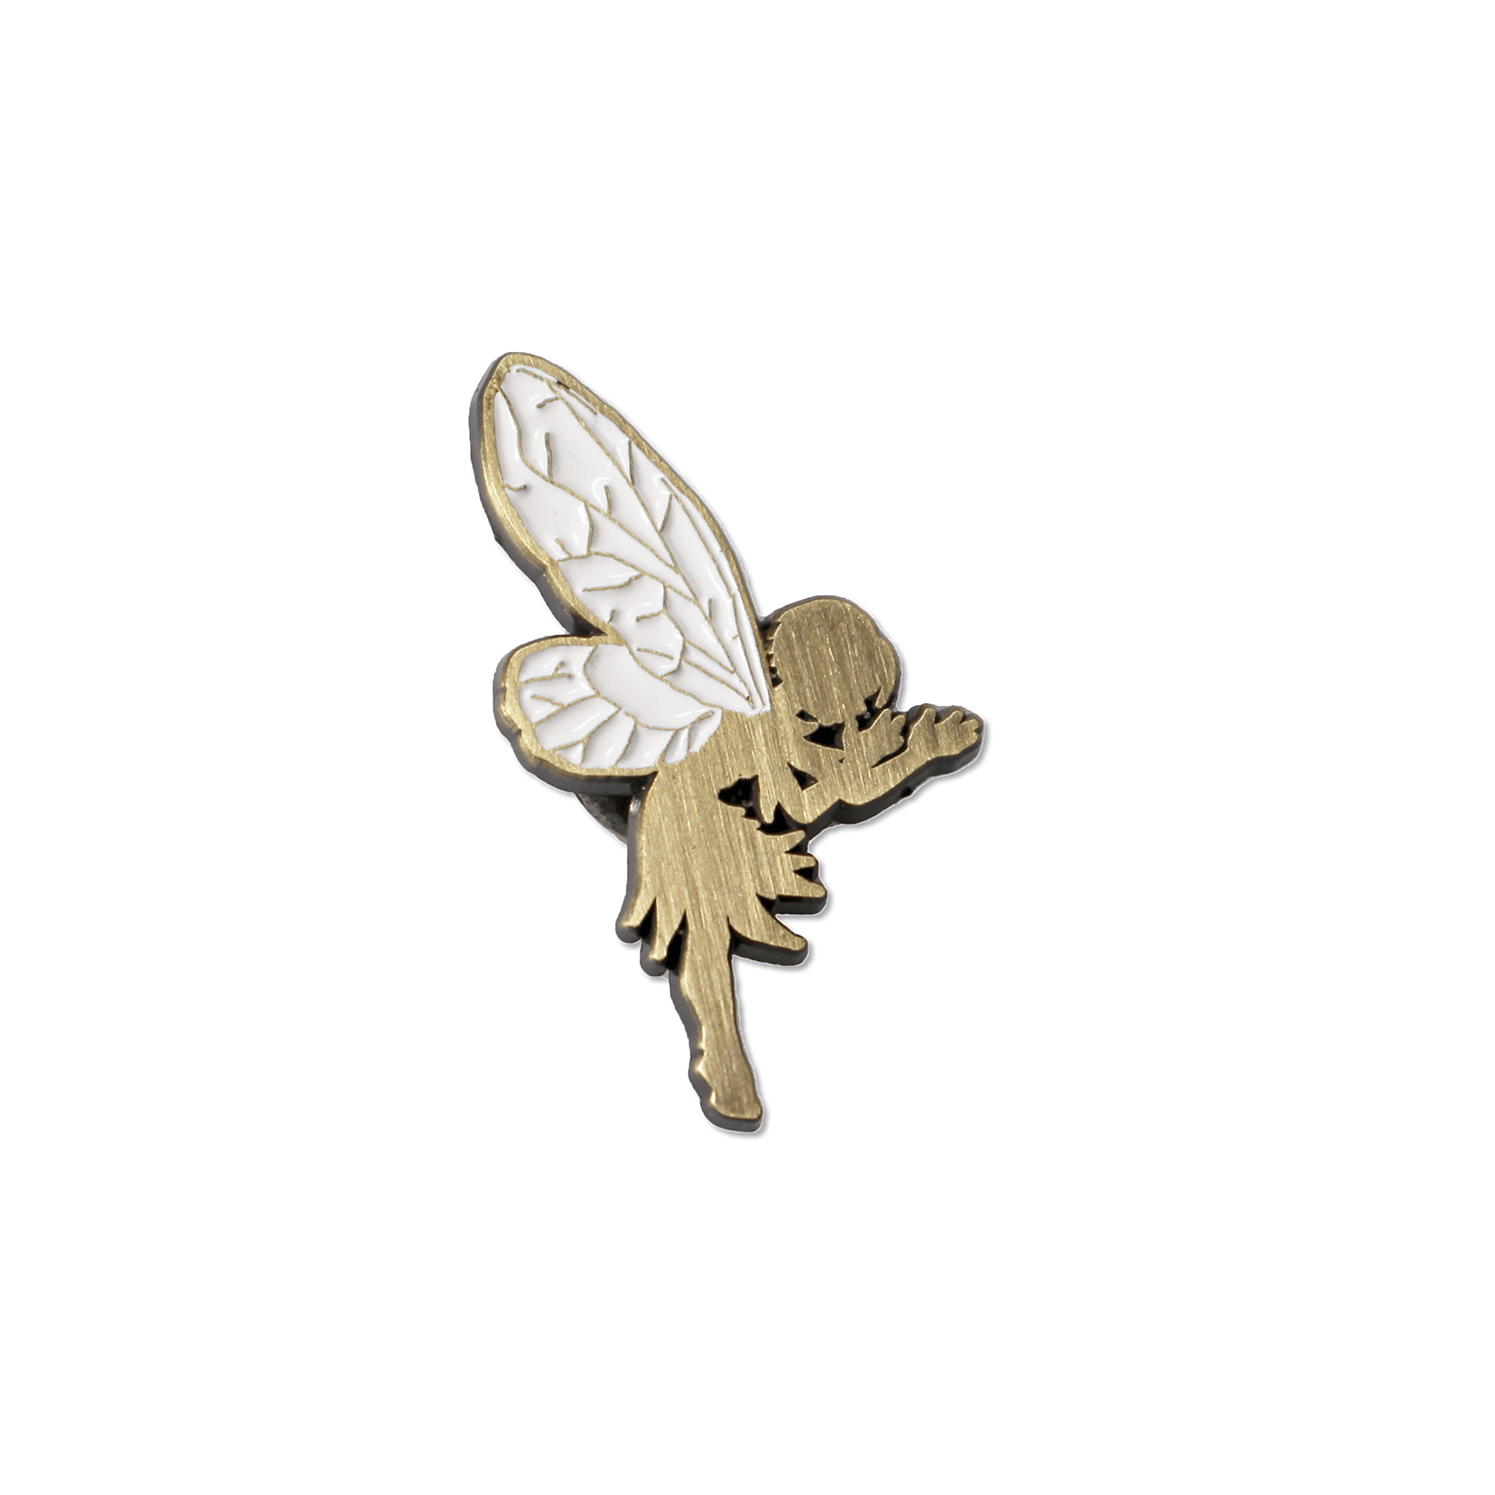 Tinkerbell inspired pin badge